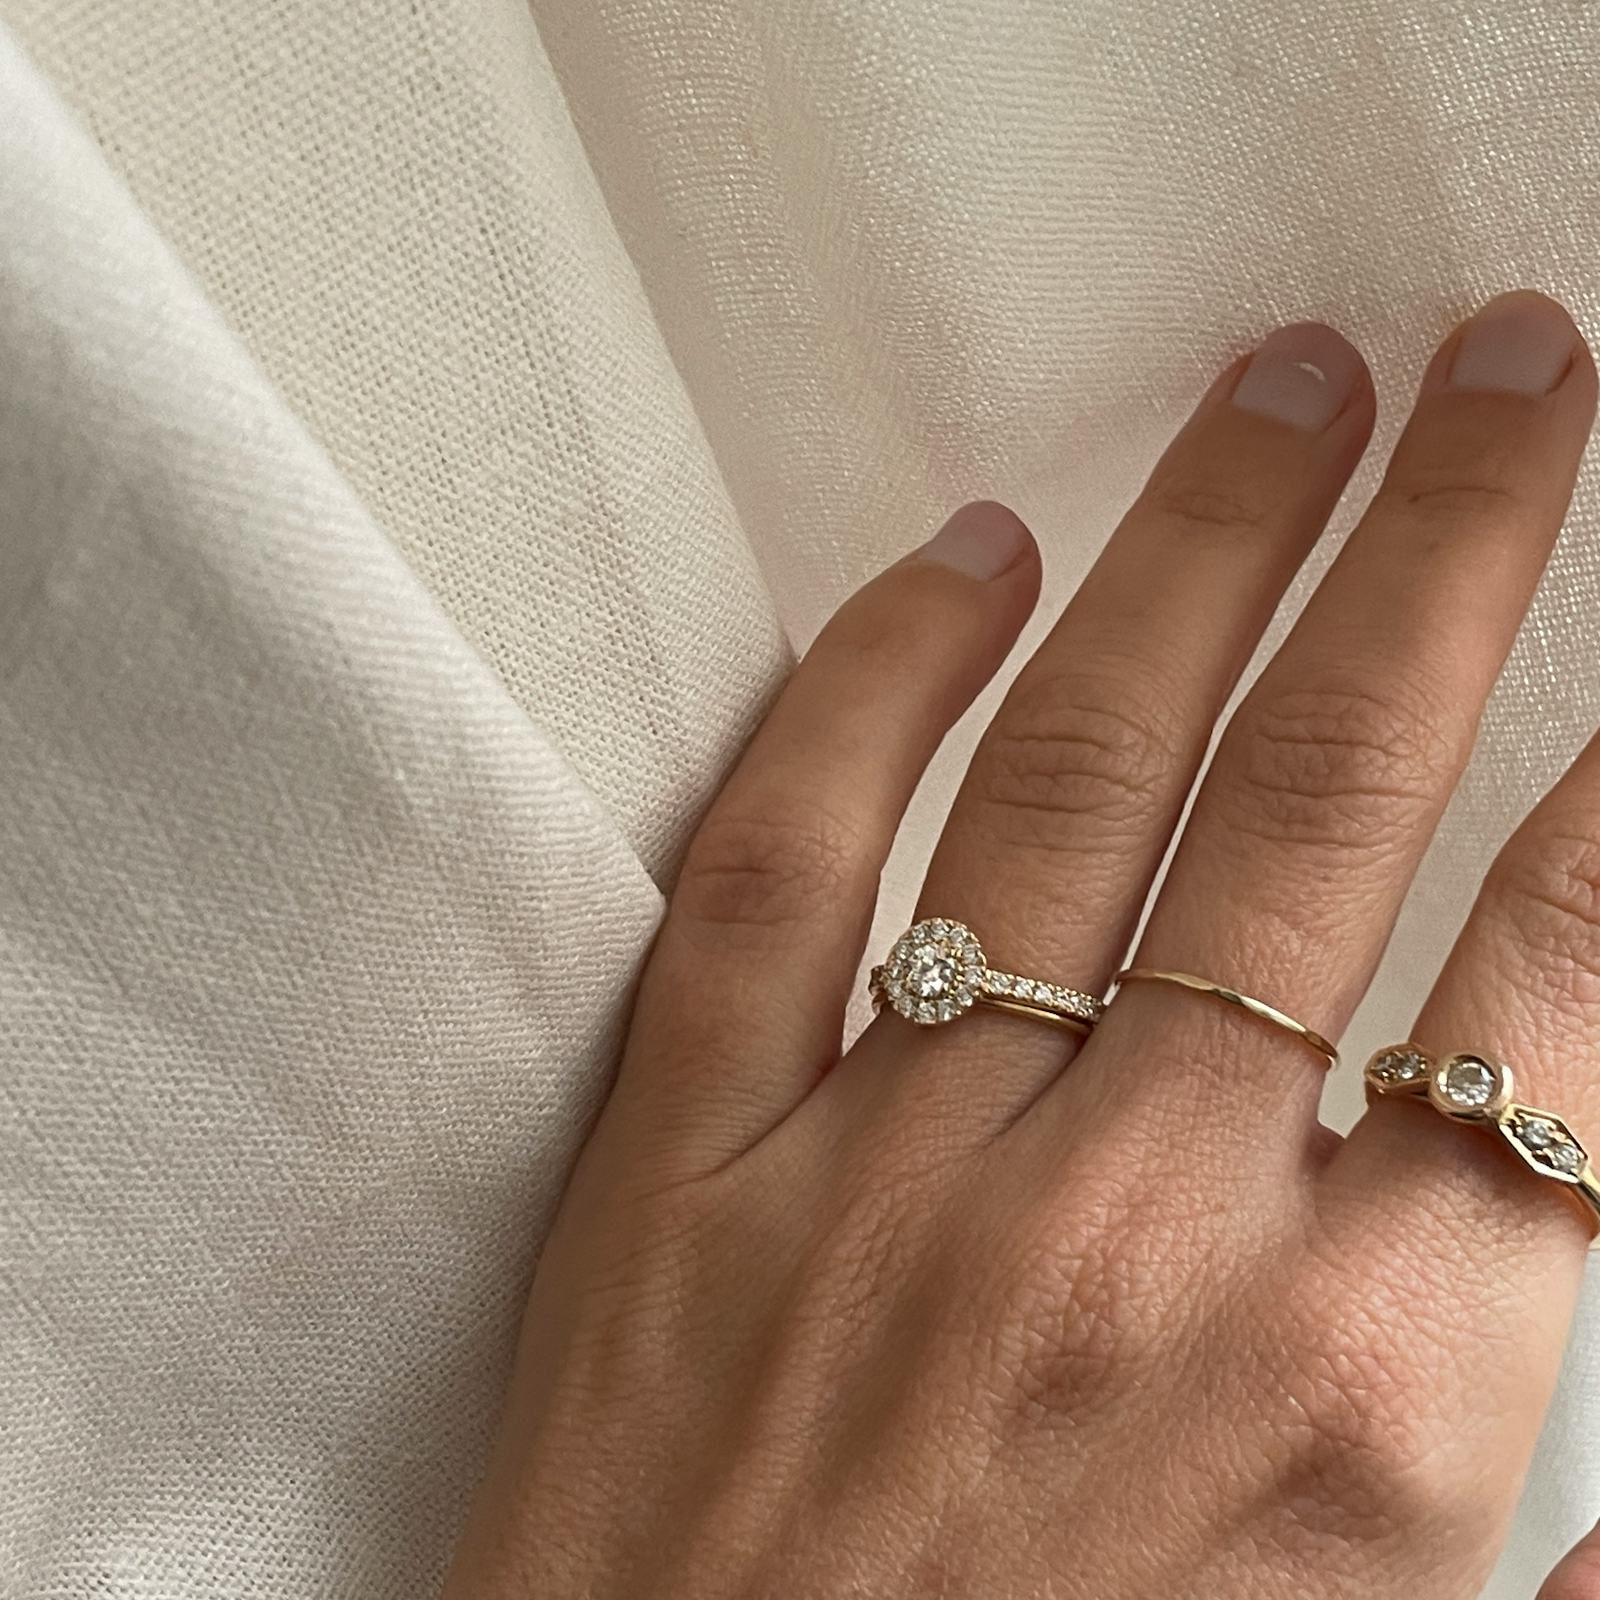 This French Engagement Ring Trend Feels SO Elevated